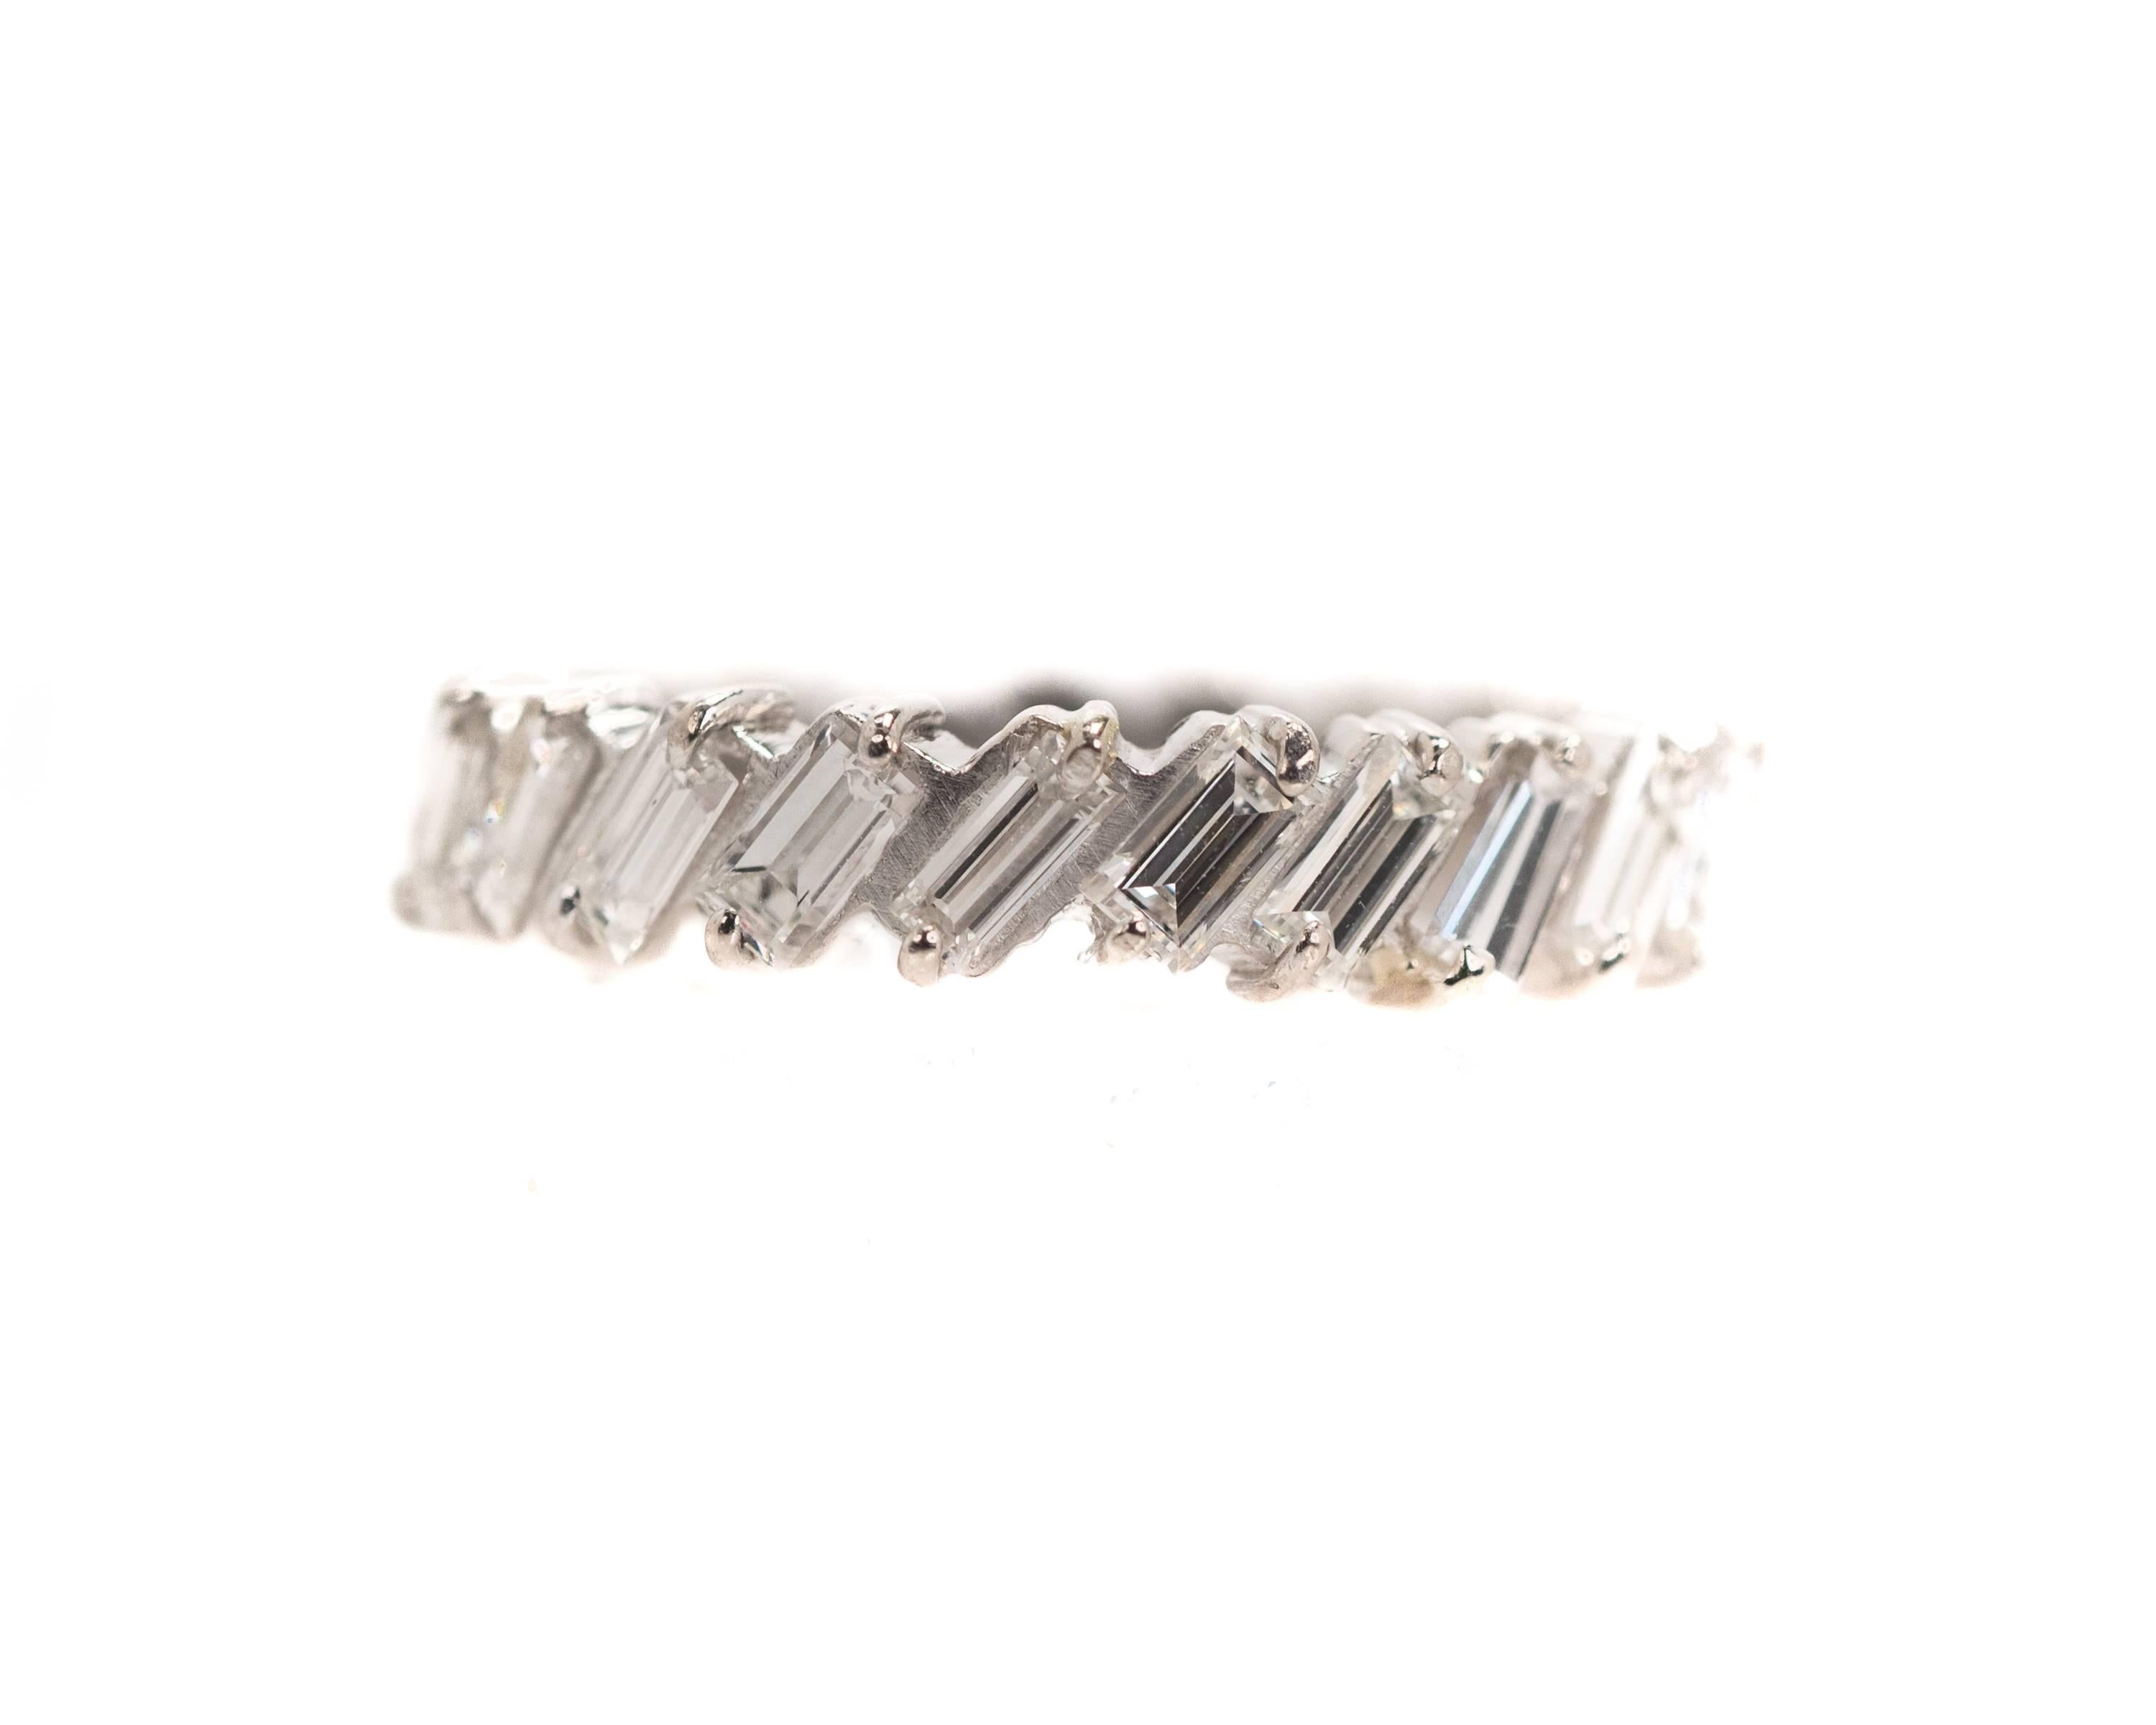 1940s Half Way Around Eternity Band - 14K White Gold, Baguette Diamonds

Features a half circle of Baguette Diamonds set in 14K White Gold. The front half of the ring is set with Glittering Baguette Diamonds. The back half of the ring is Glimmering